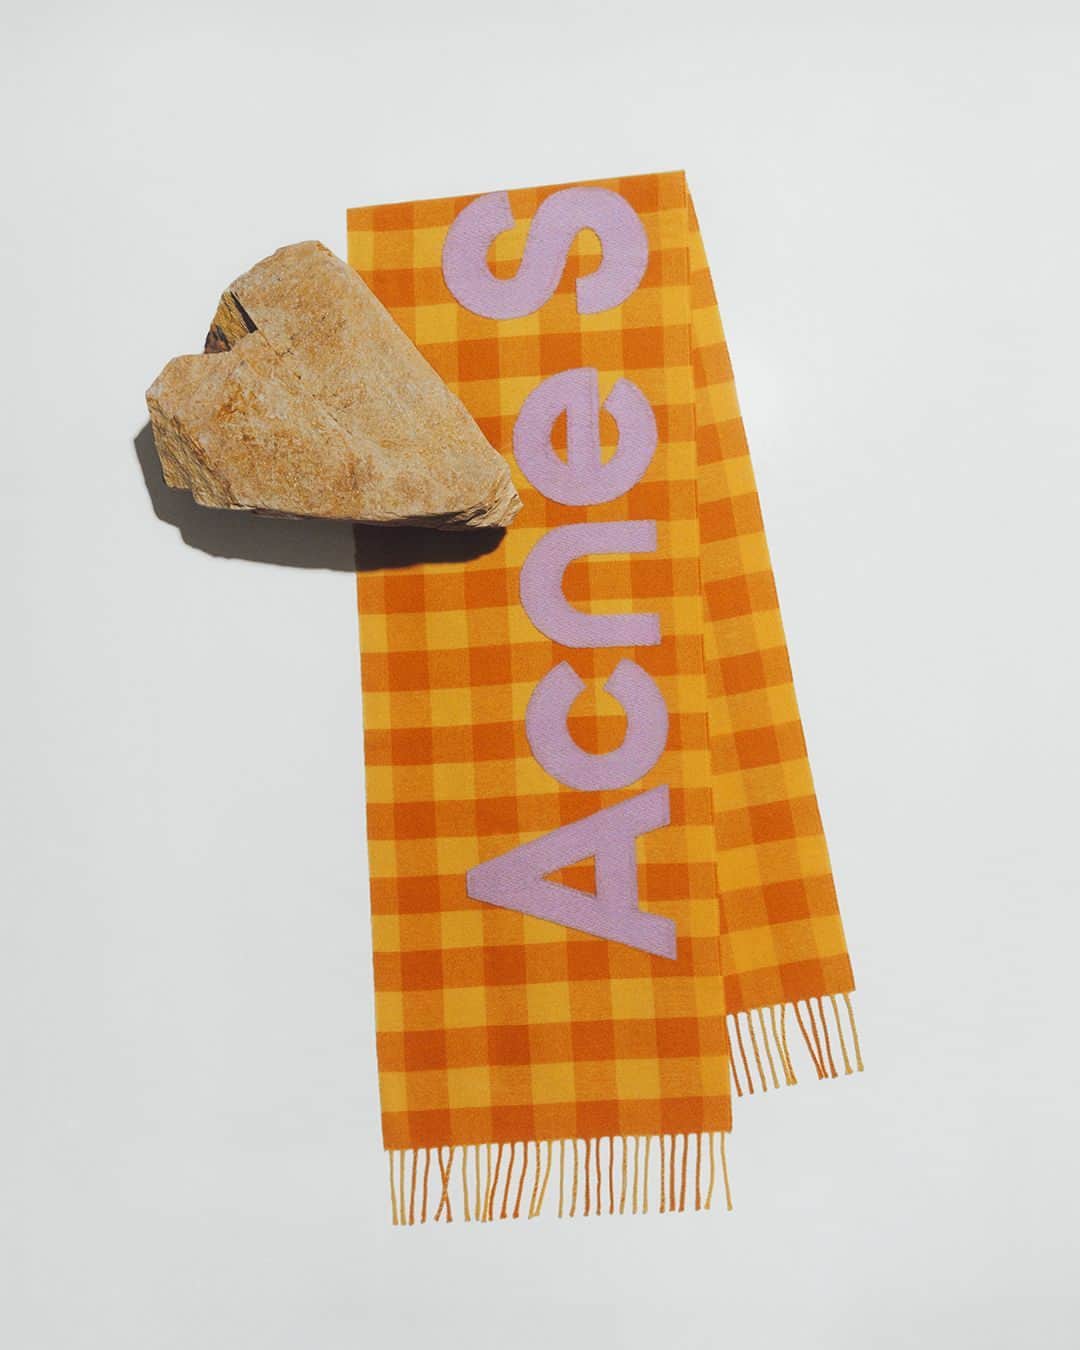 Acne Studiosのインスタグラム：「Our iconic scarves add an energetic touch to the cosiest season of the year. Discover new #AcneStudios scarves, available now in store and online. ⁣ ⁣ Photographer: #JeanMarieBinet (@JimBiners)⁣⁣⁣⁣ Set designer: #AliceKirkpatrick (@Alicekpk)」